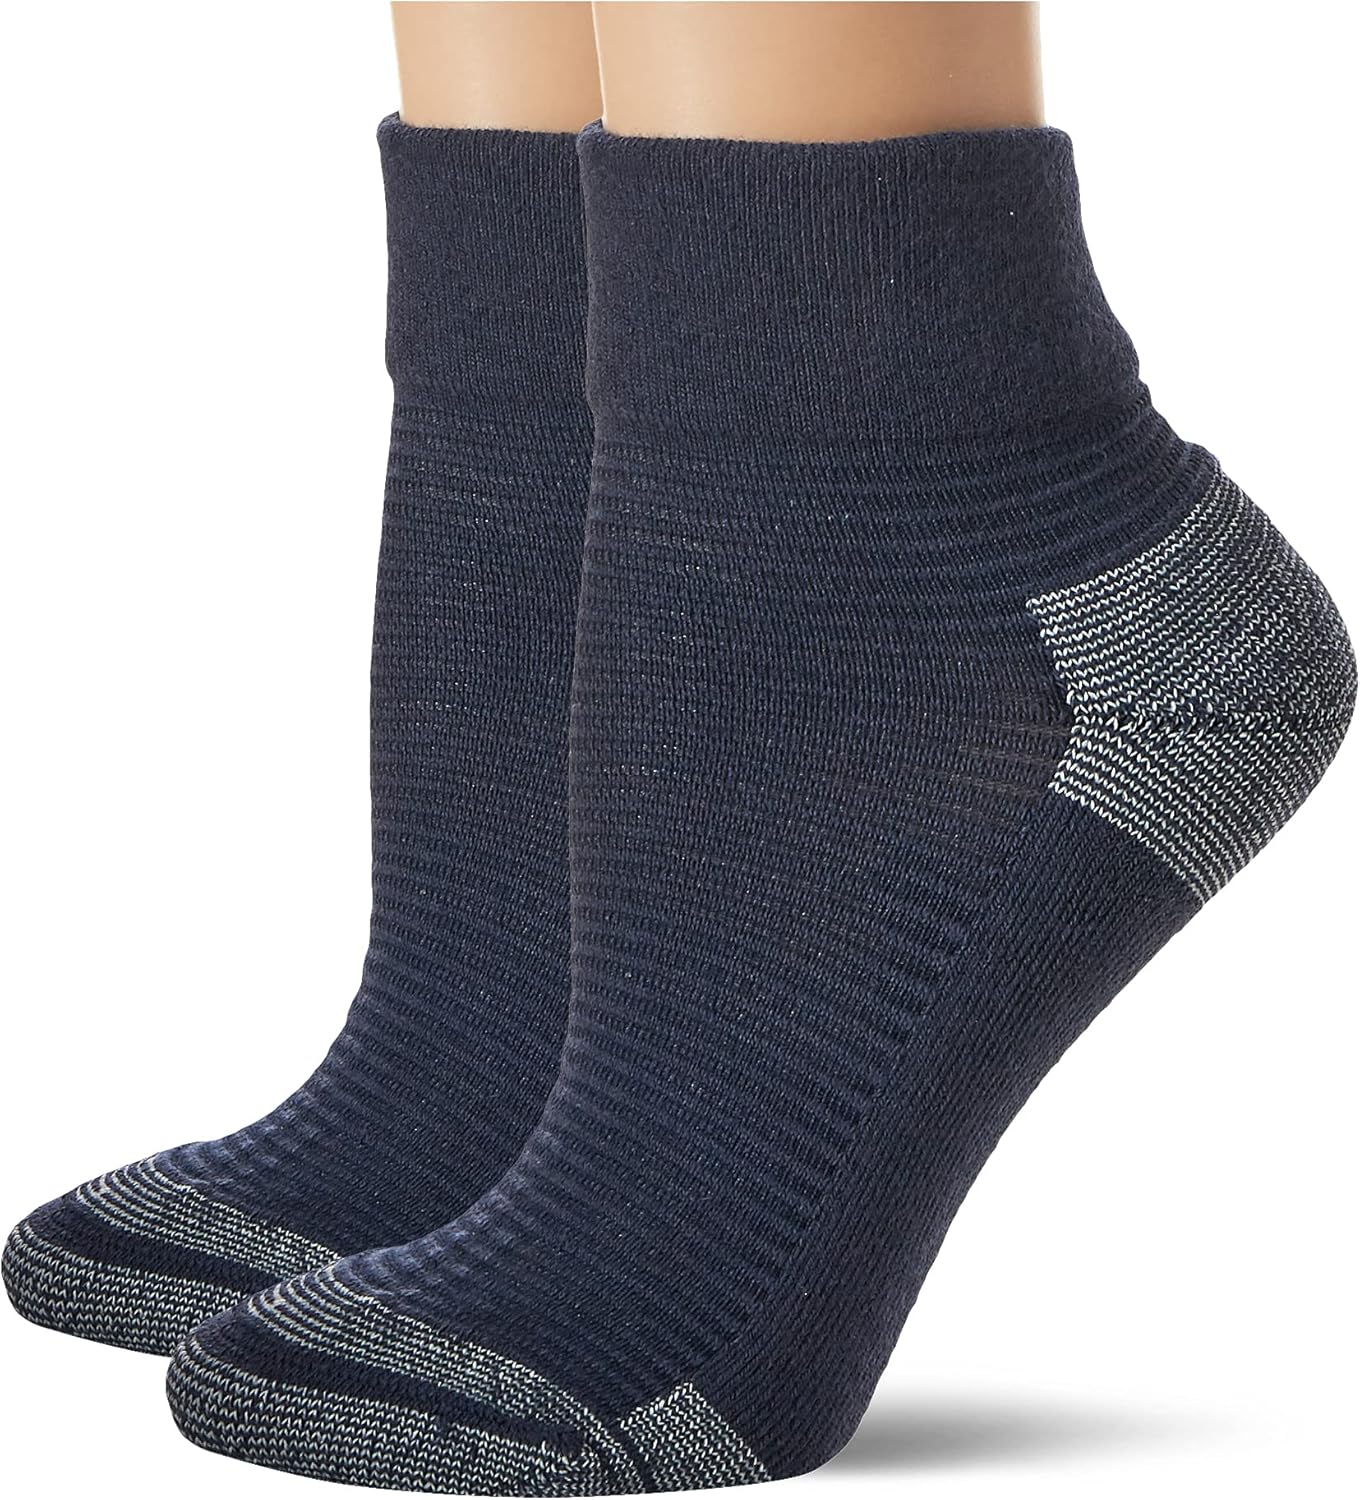 Dr. Scholl's womens Advanced Relief Blisterguard - 2 & 3 Pair Packs Sock, Navy, 4 10 US